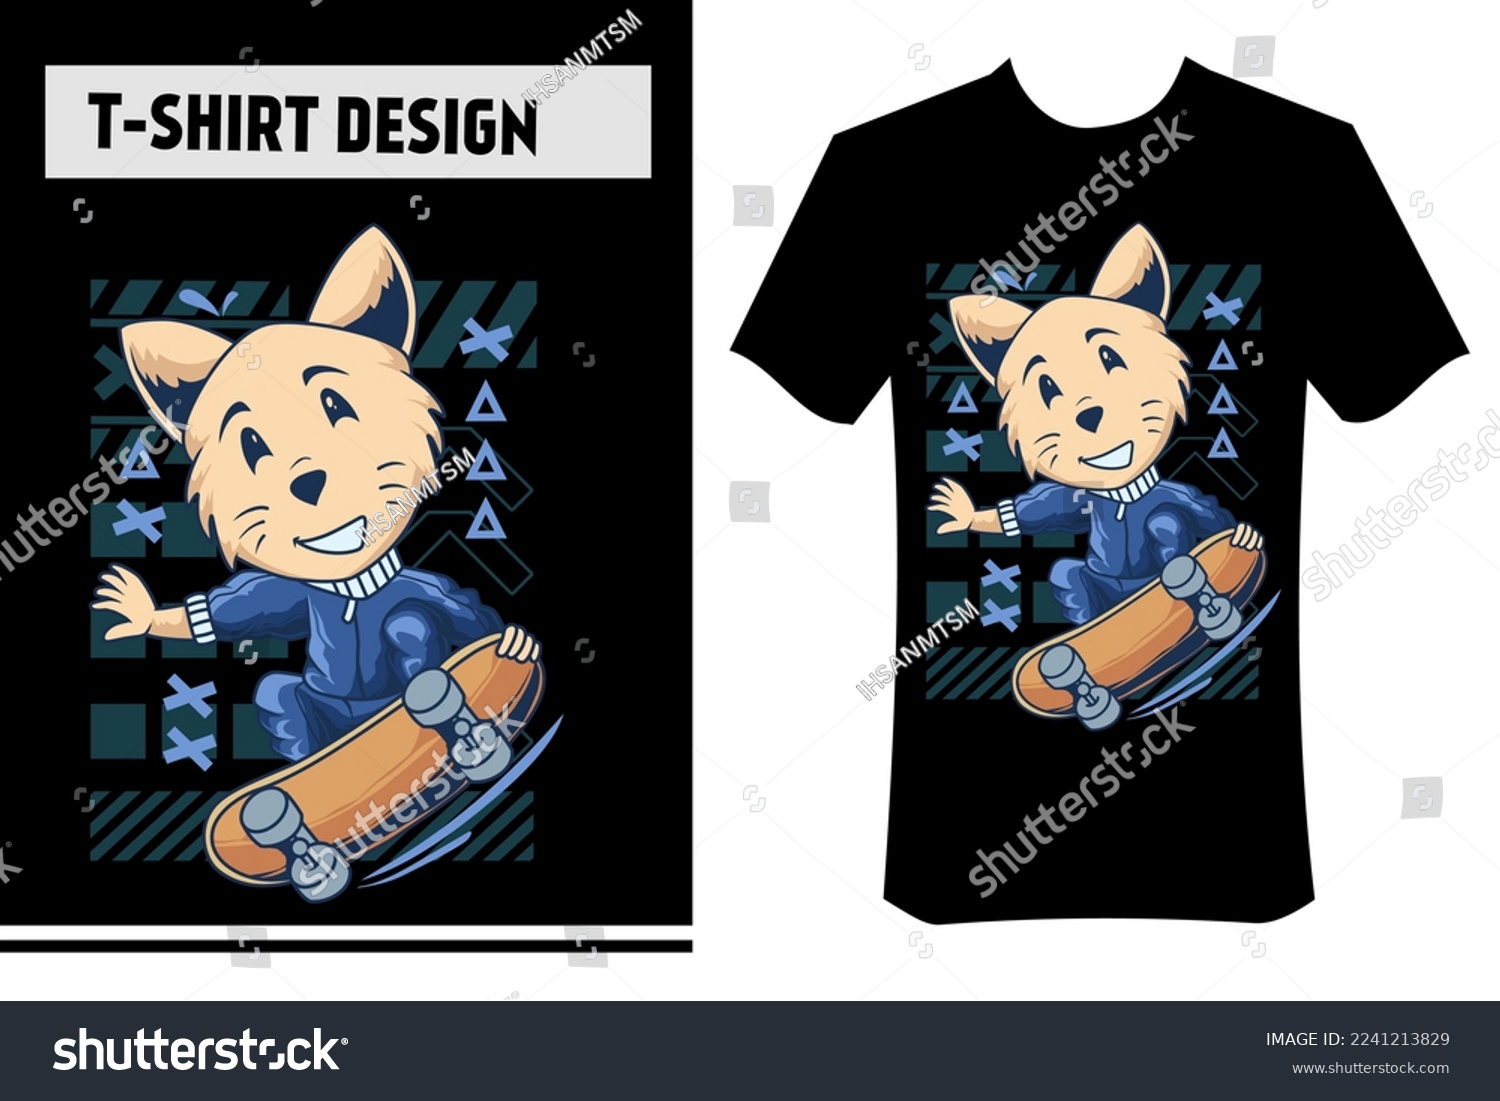 SVG of vector design for t-shirt, illustration of a dog playing skateboard, wearing a board and jacket. with a street wear concept, perfect for clothing, hoodies, apparel, merchandise, stickers, posters. svg